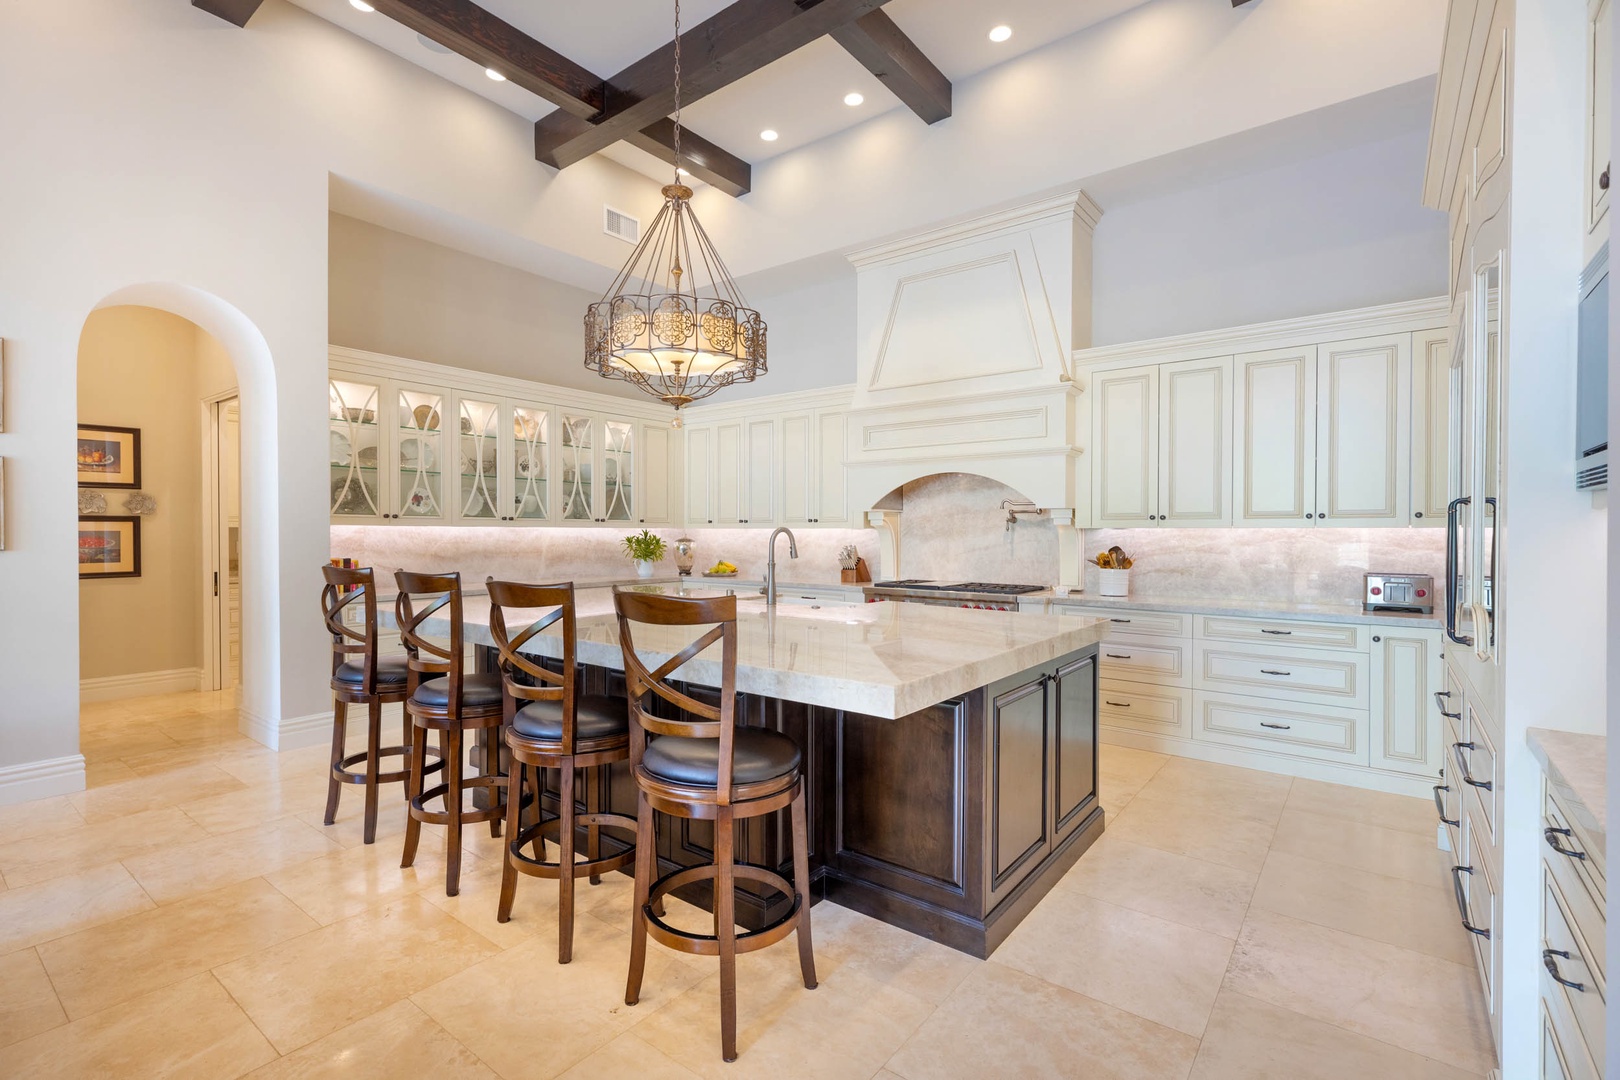 Honolulu Vacation Rentals, The Kahala Mansion - Elegant kitchen island with seating for dining and socializing.